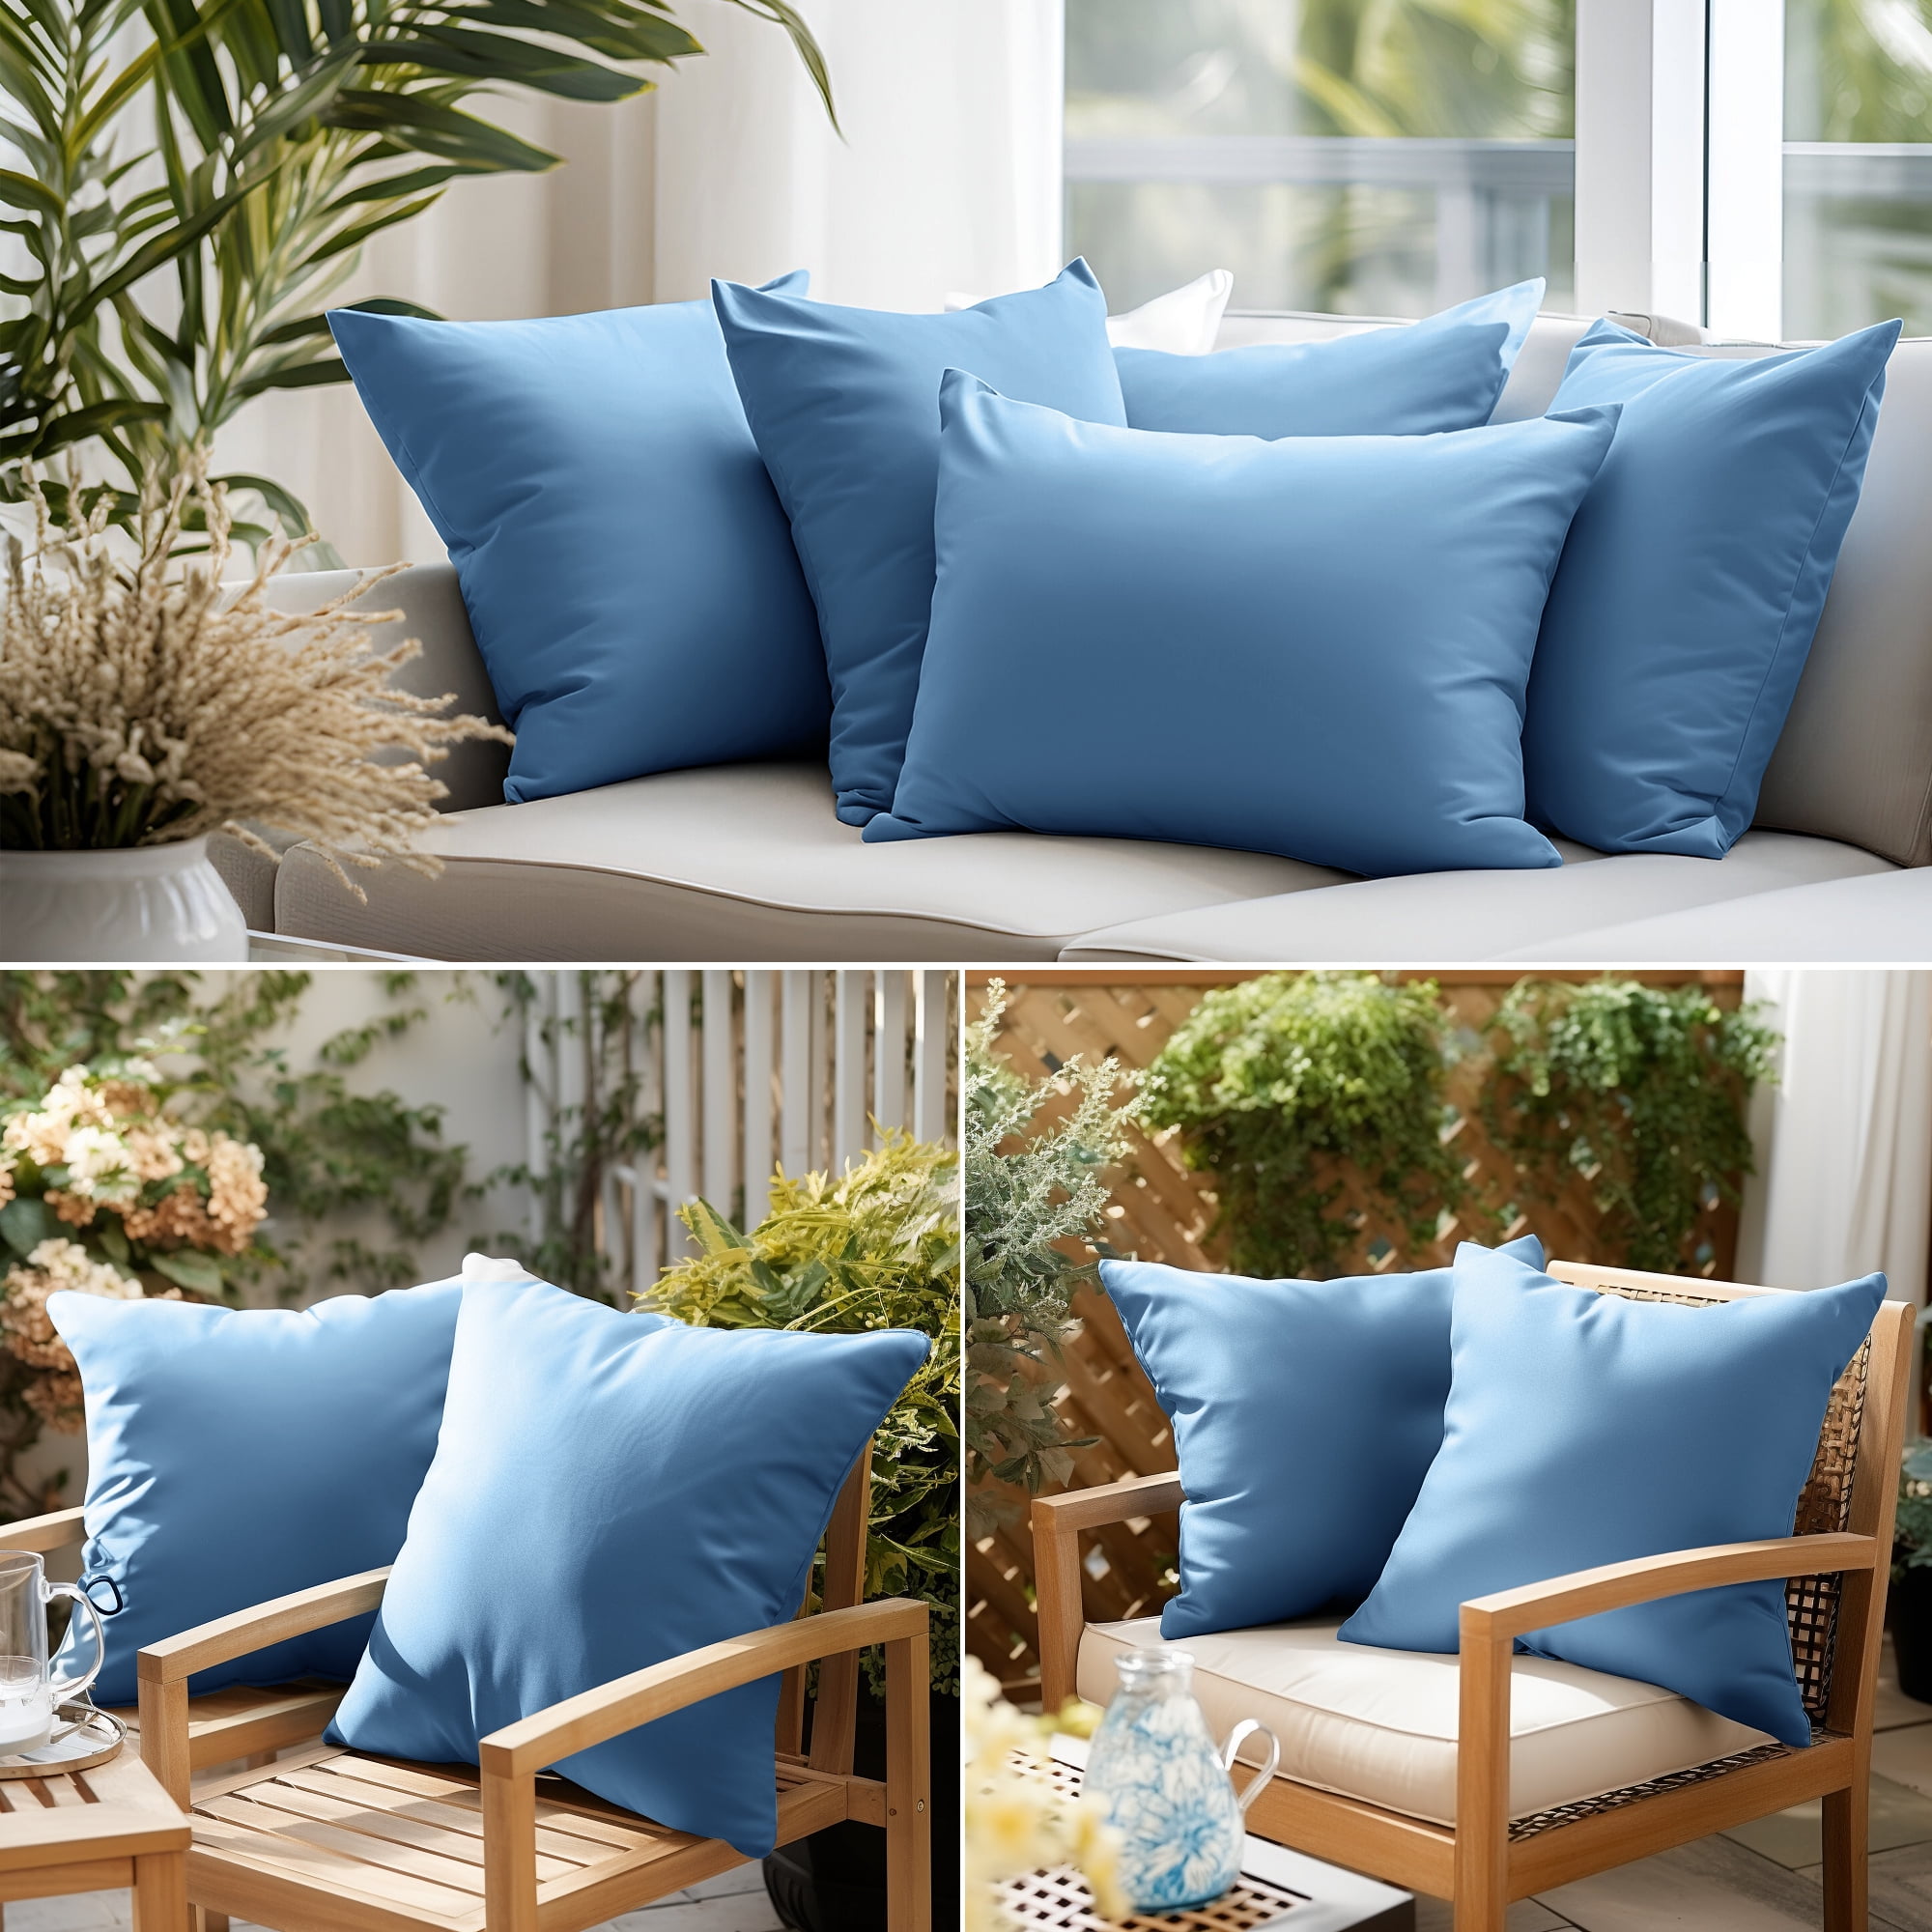  KAKABELL Throw Pillow Inserts Waterproof 18X18 Set of 2 Down  Feather Filled Sofa Pillow Inserts with 100% Cotton Shell Decorative Pillows  for Couch-Bed Outdoor Cushion Pillow Insert : Home & Kitchen